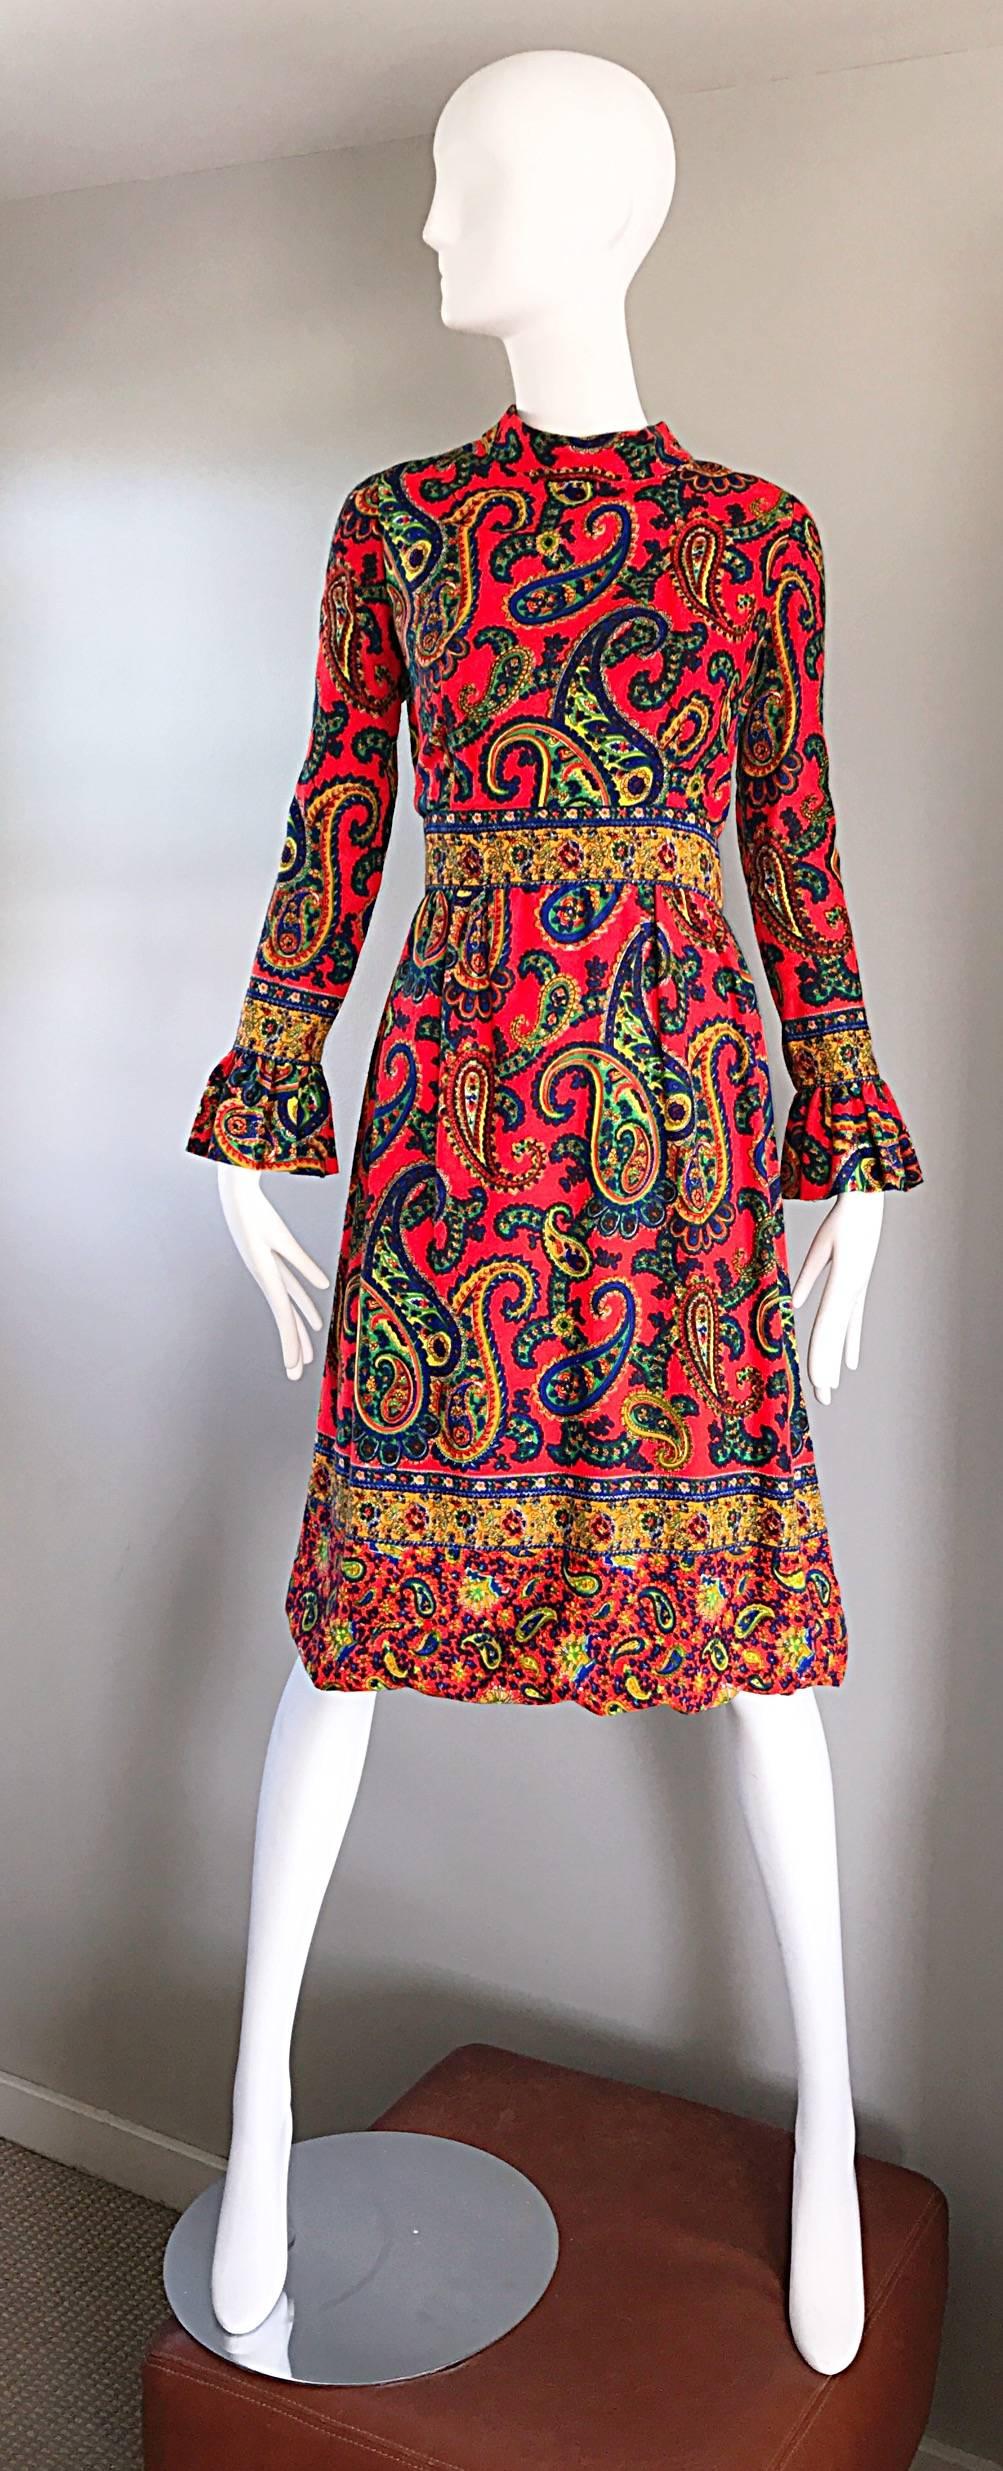 Brilliant vintage late 1960s PAT SNADLER bright orange paisley print psychedelic  A-Line / empire waist dress! Features allover paisley prints in vibrant blue, green, yellow, orange, and red throughout. Flattering fit, with sleek tailored long